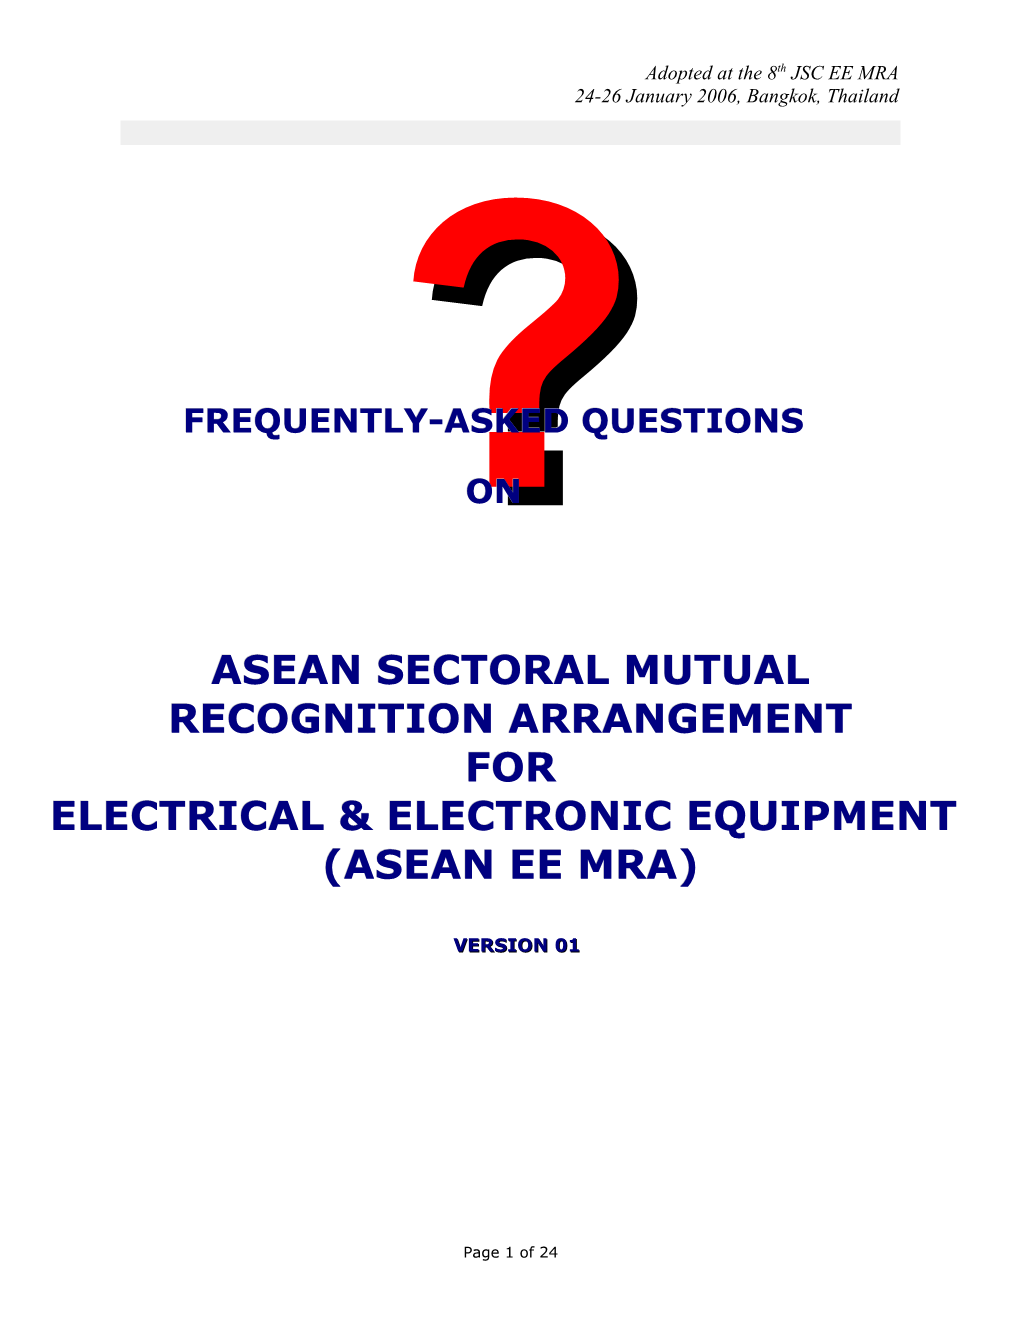 ASEAN SECTORAL Mras for ELECTRICAL and ELECTRONIC EQUIPMENT (ASEAN EE MRA): INFORMATION BOOKLET